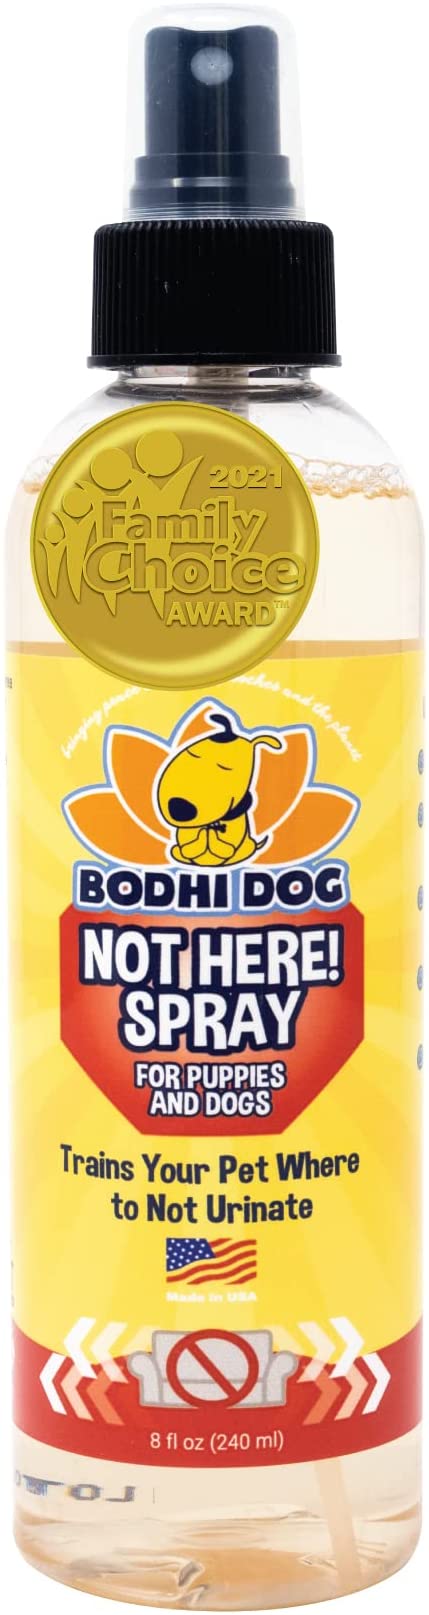 Bodhi Dog Not Here! Spray | Trains Your Pet Where Not to Urinate | Training Corrector for Puppies & Dogs | Indoor & Outdoor Use | No More Marking | Made in The USA